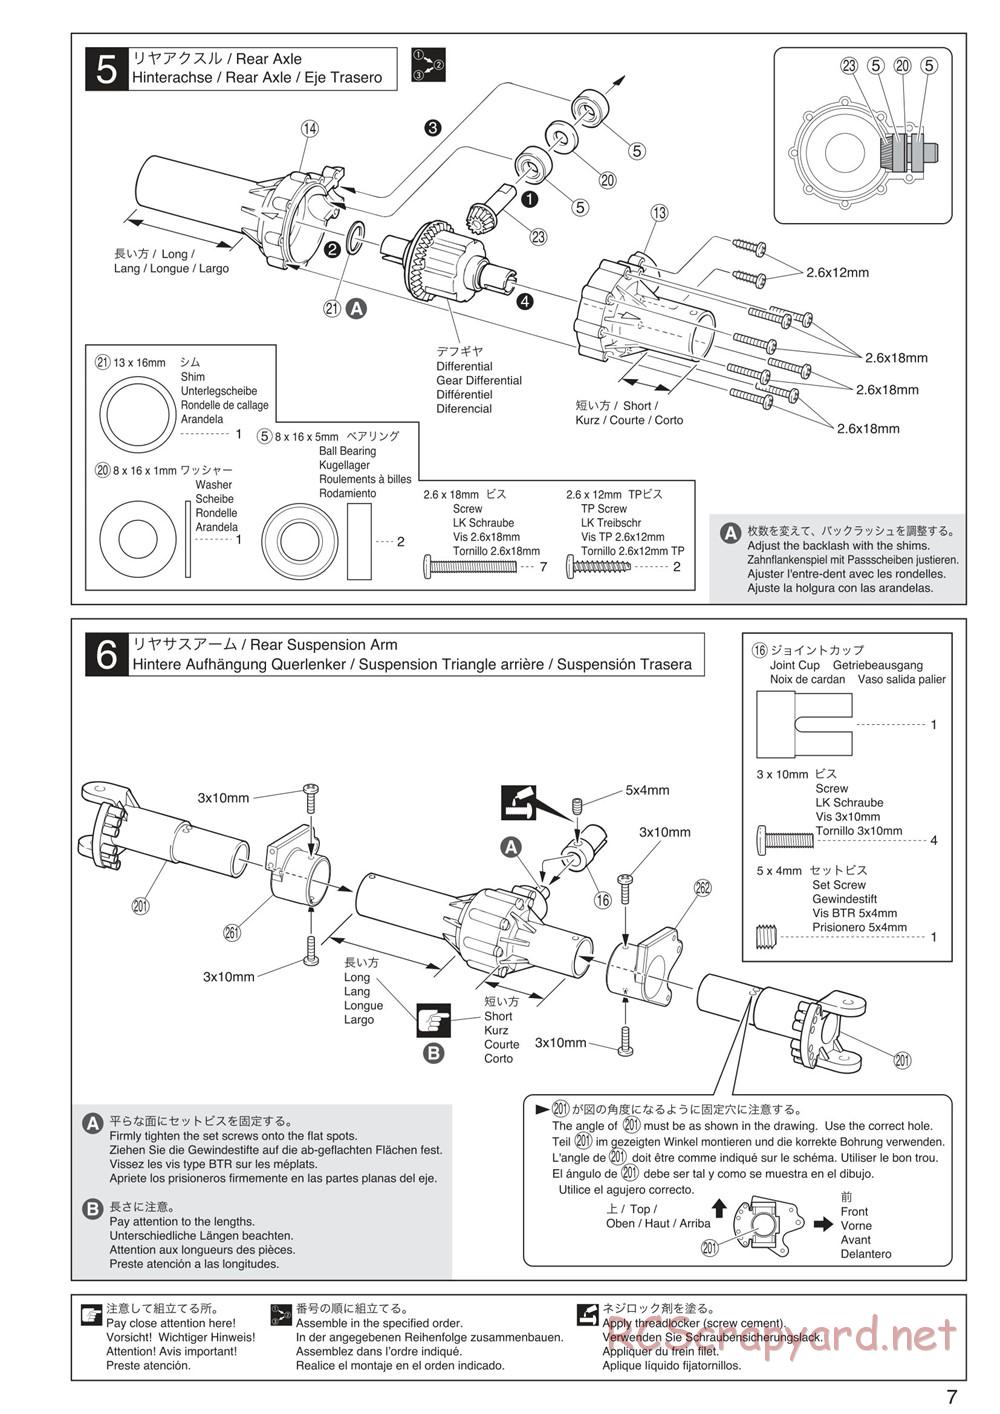 Kyosho - Mad Crusher VE - Manual - Page 7